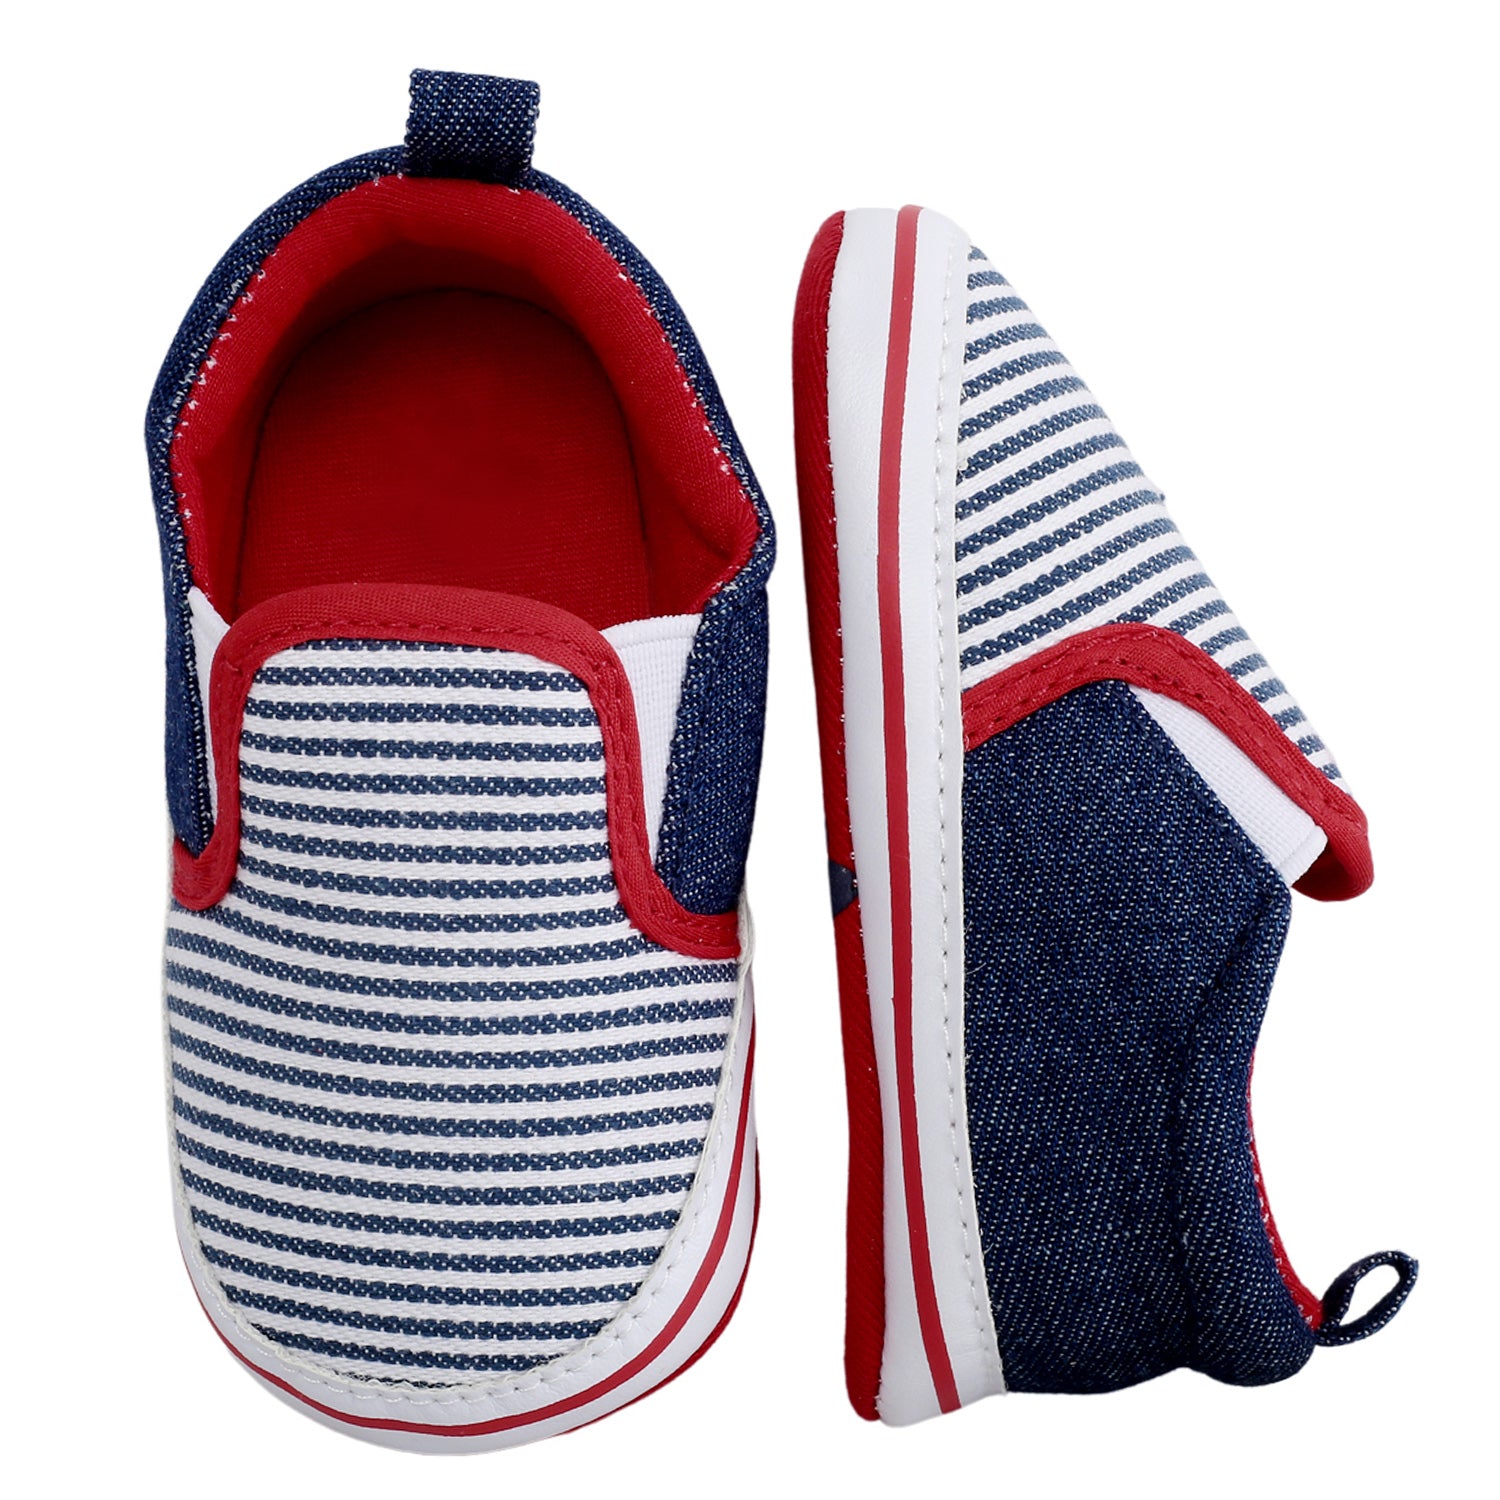 Baby Moo Striped Blue Slip-On Booties